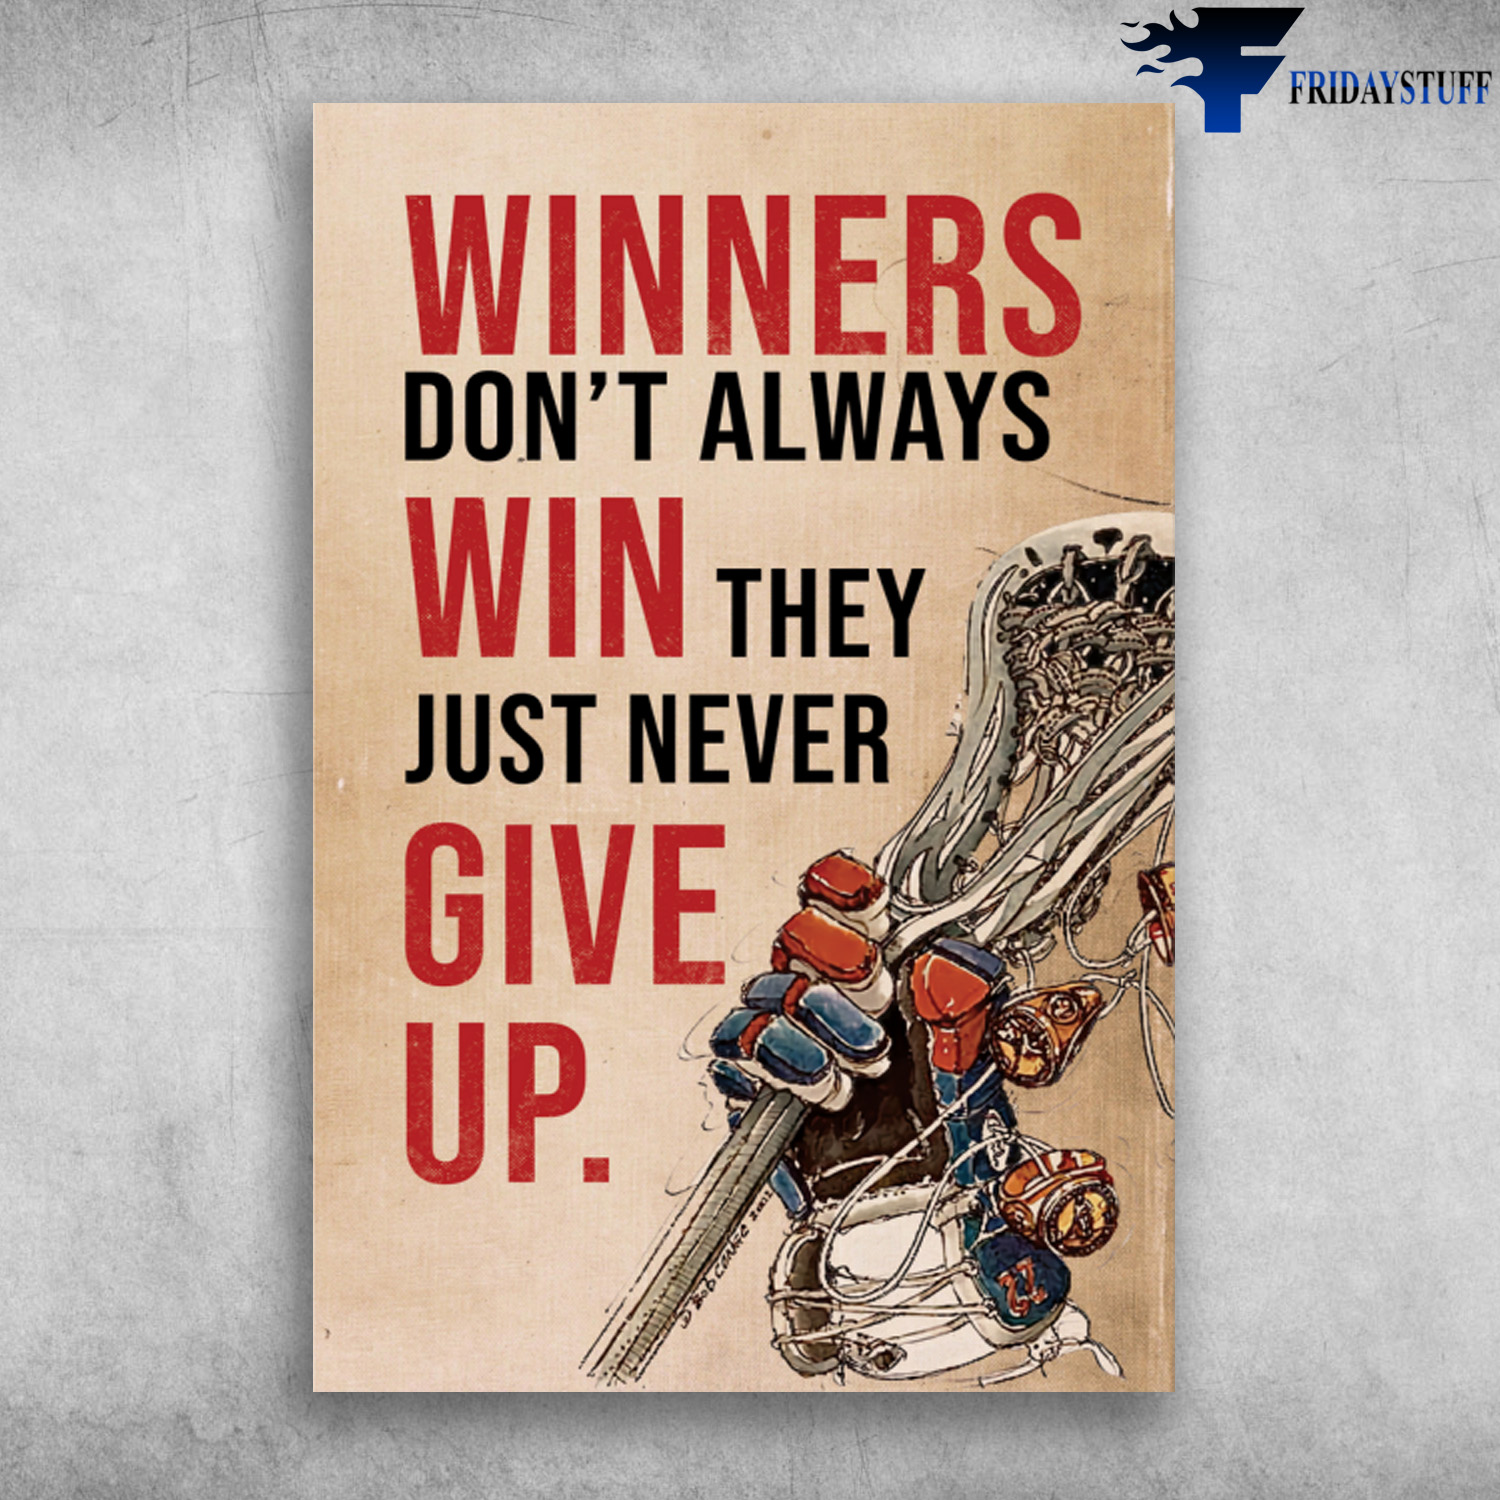 Lacrosse - Winners Don't Always Win, They Just Never Give Up